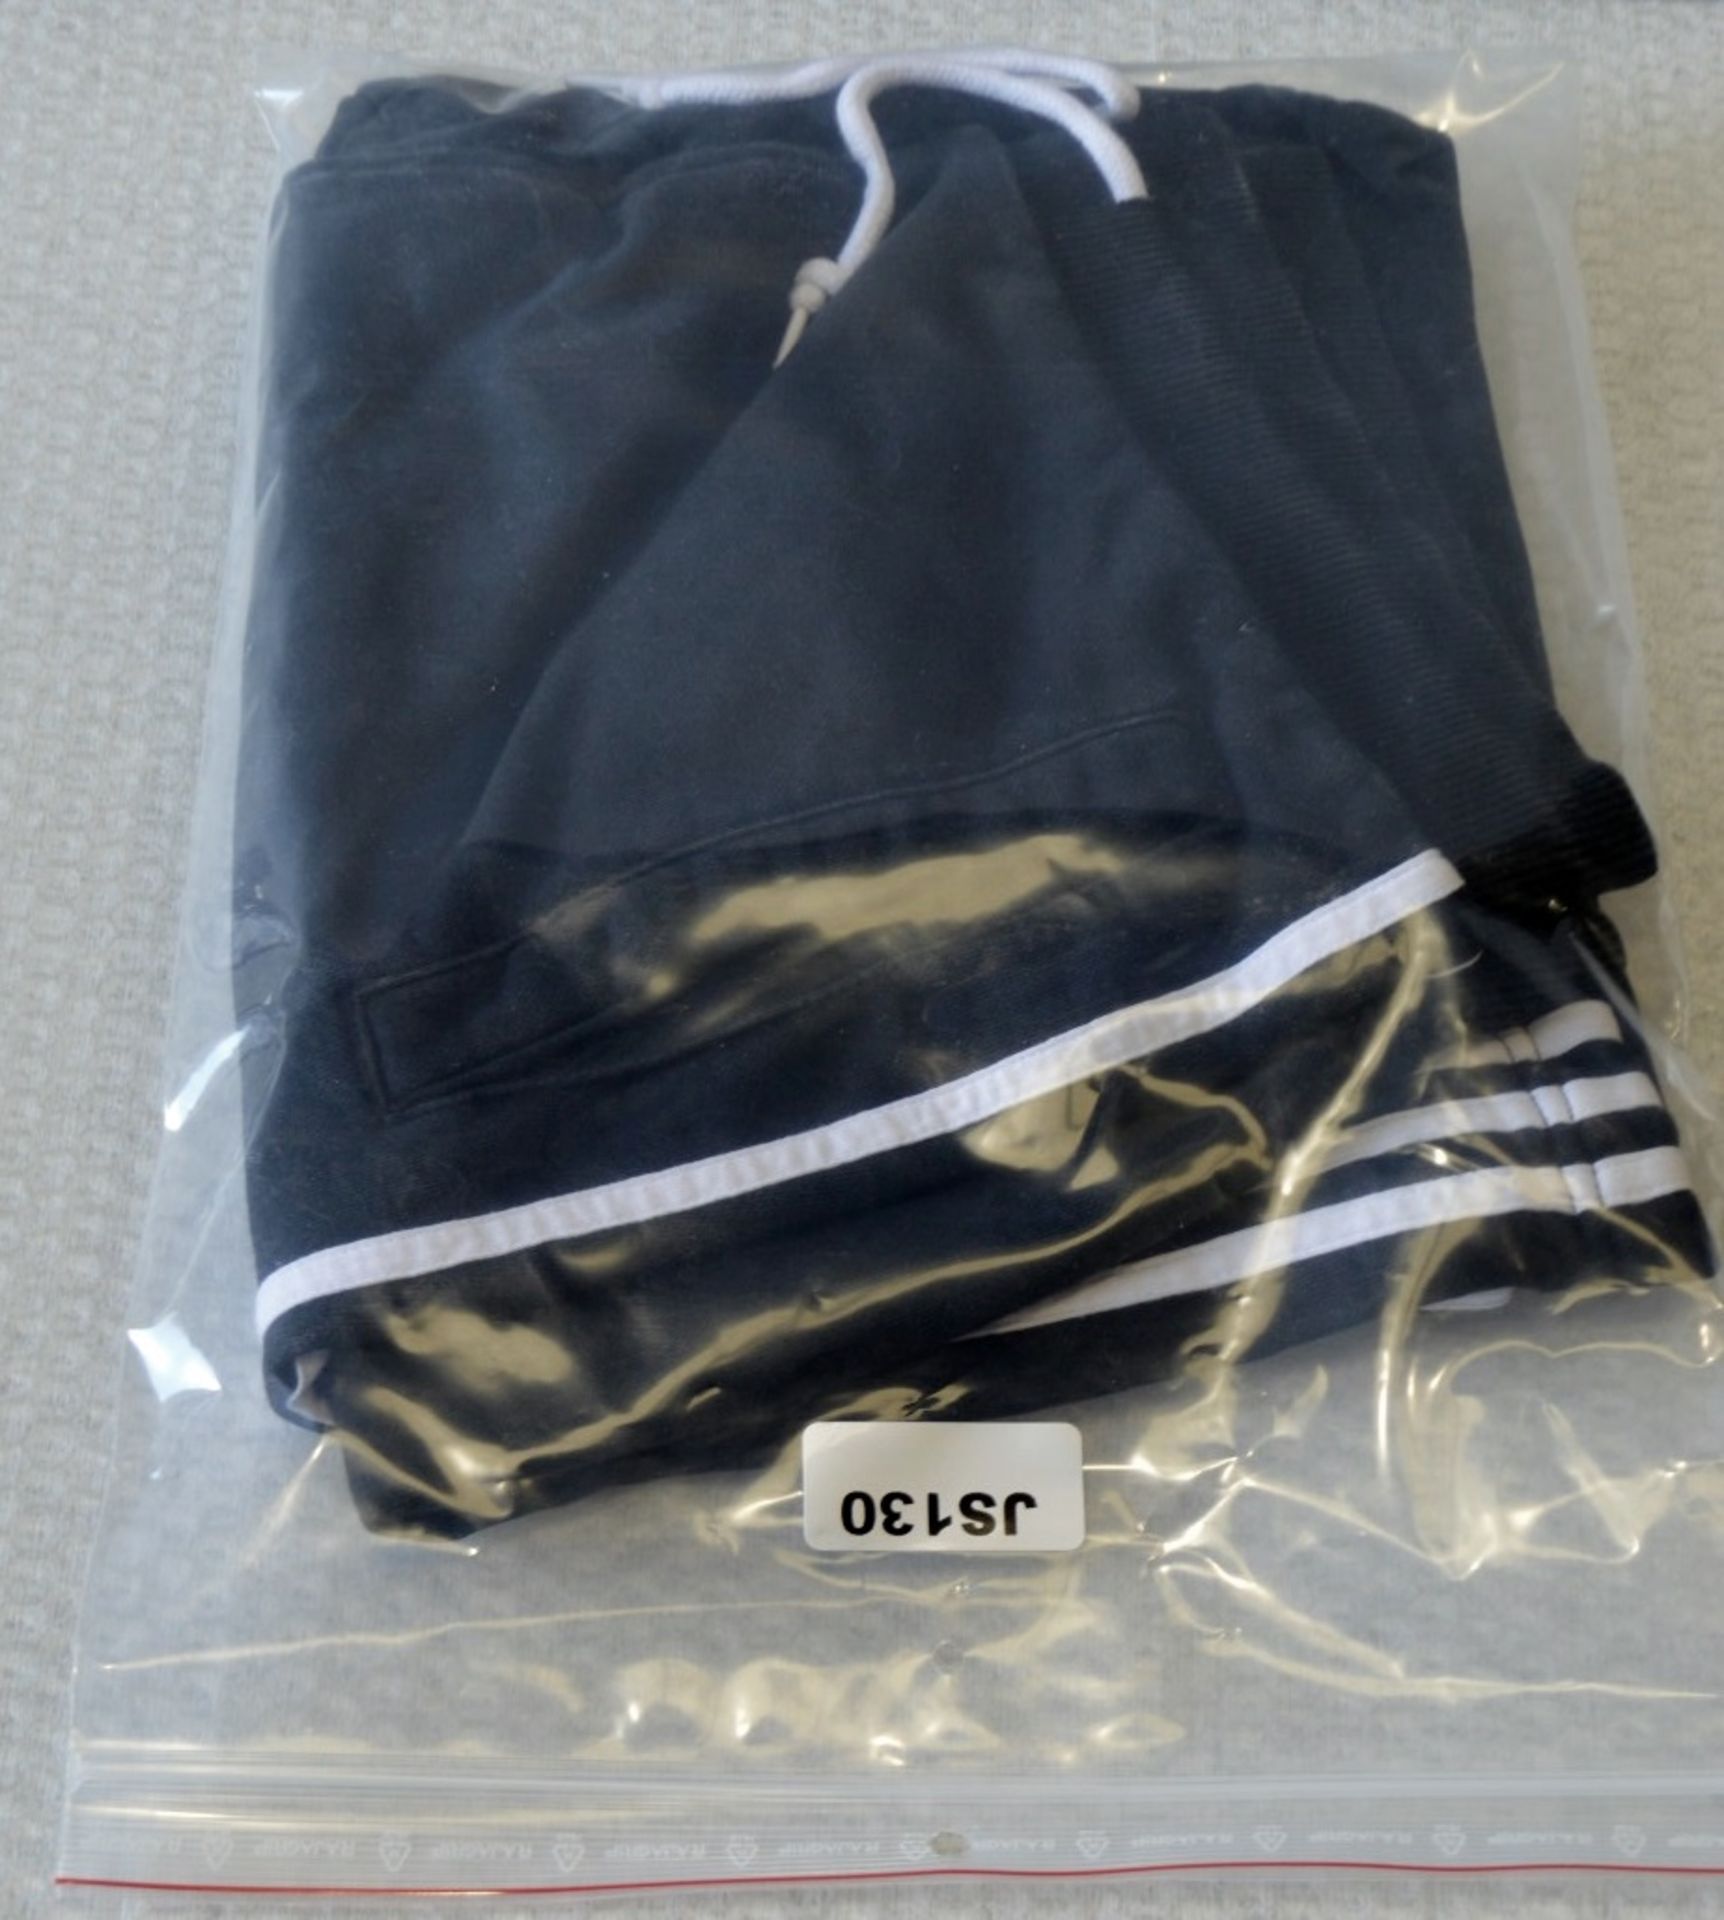 4 x Assorted Pairs Of Men's Genuine Adidas Shorts - AllIn Black - Sizes: L-XL - Preowned - Image 23 of 23